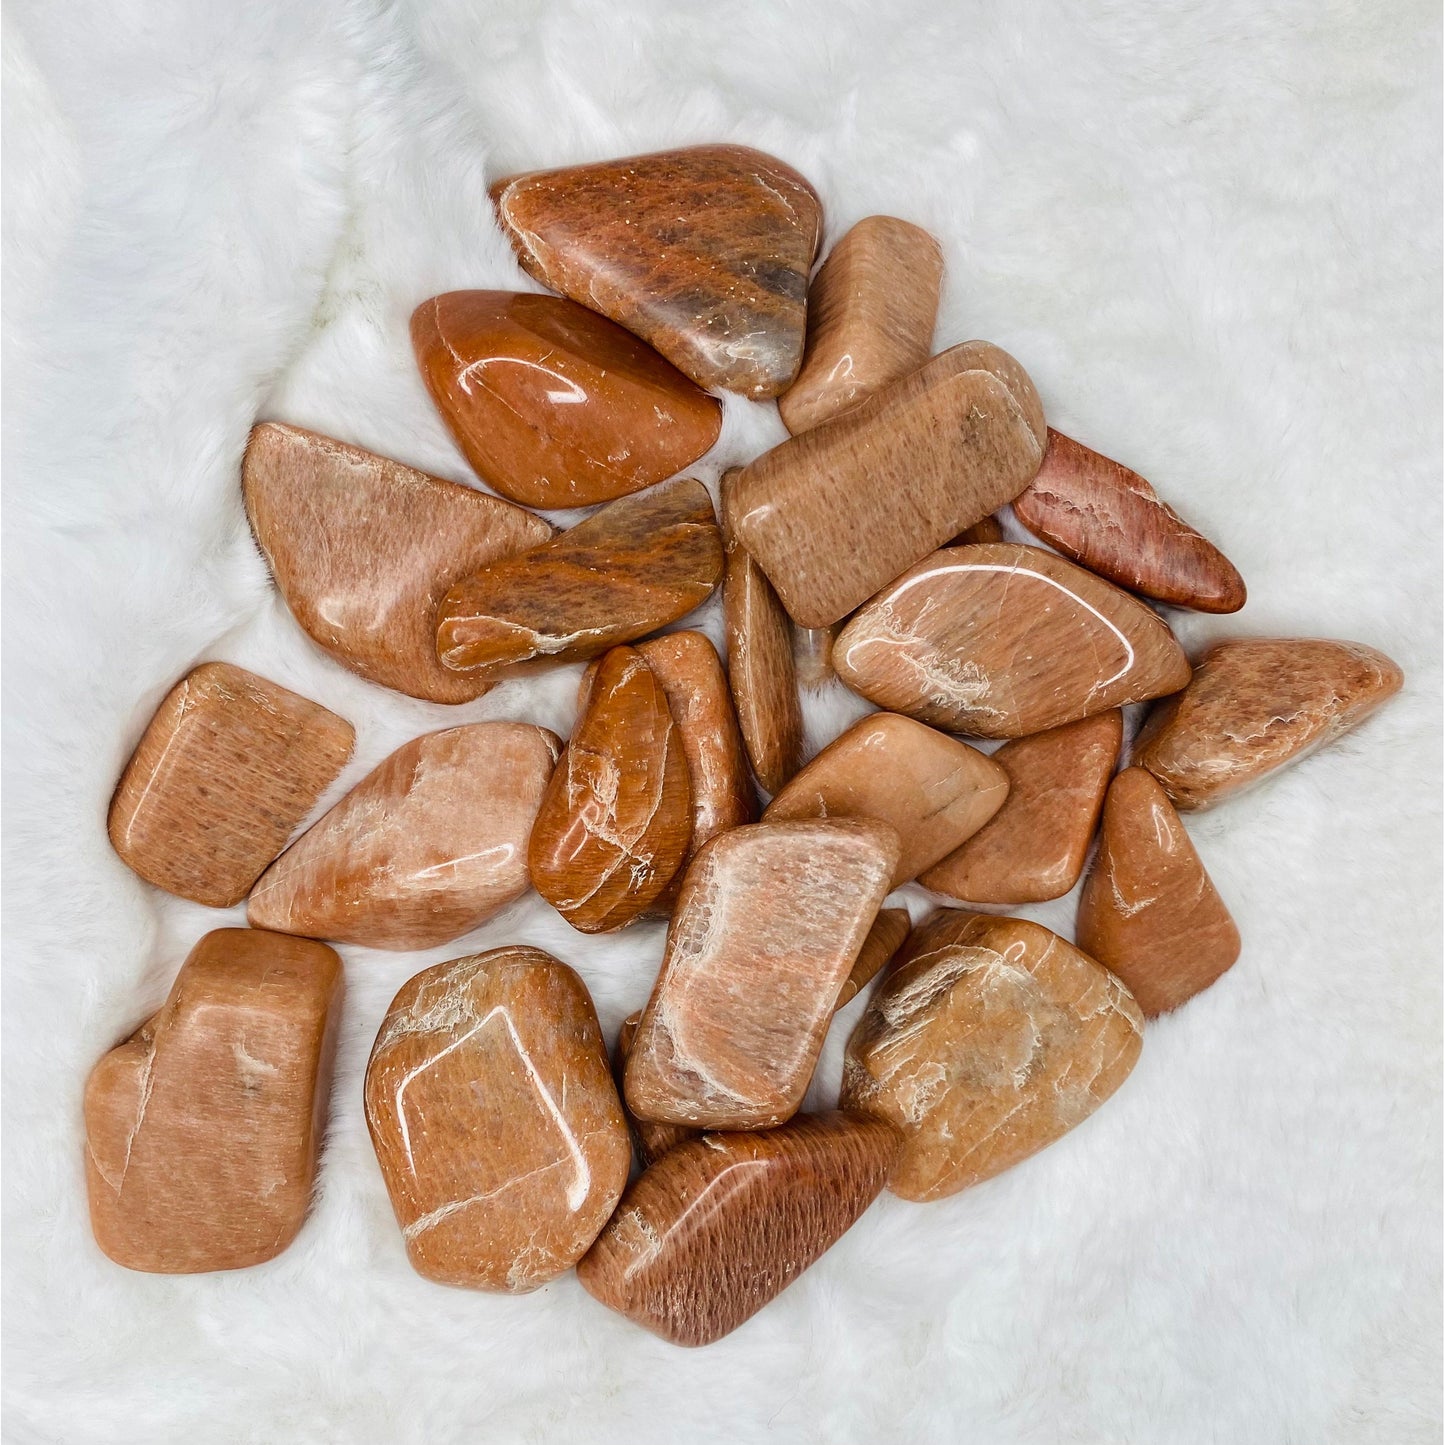 Peach Moonstone Tumbled Crystals: Embrace Tranquility & Reigniting your Passion!